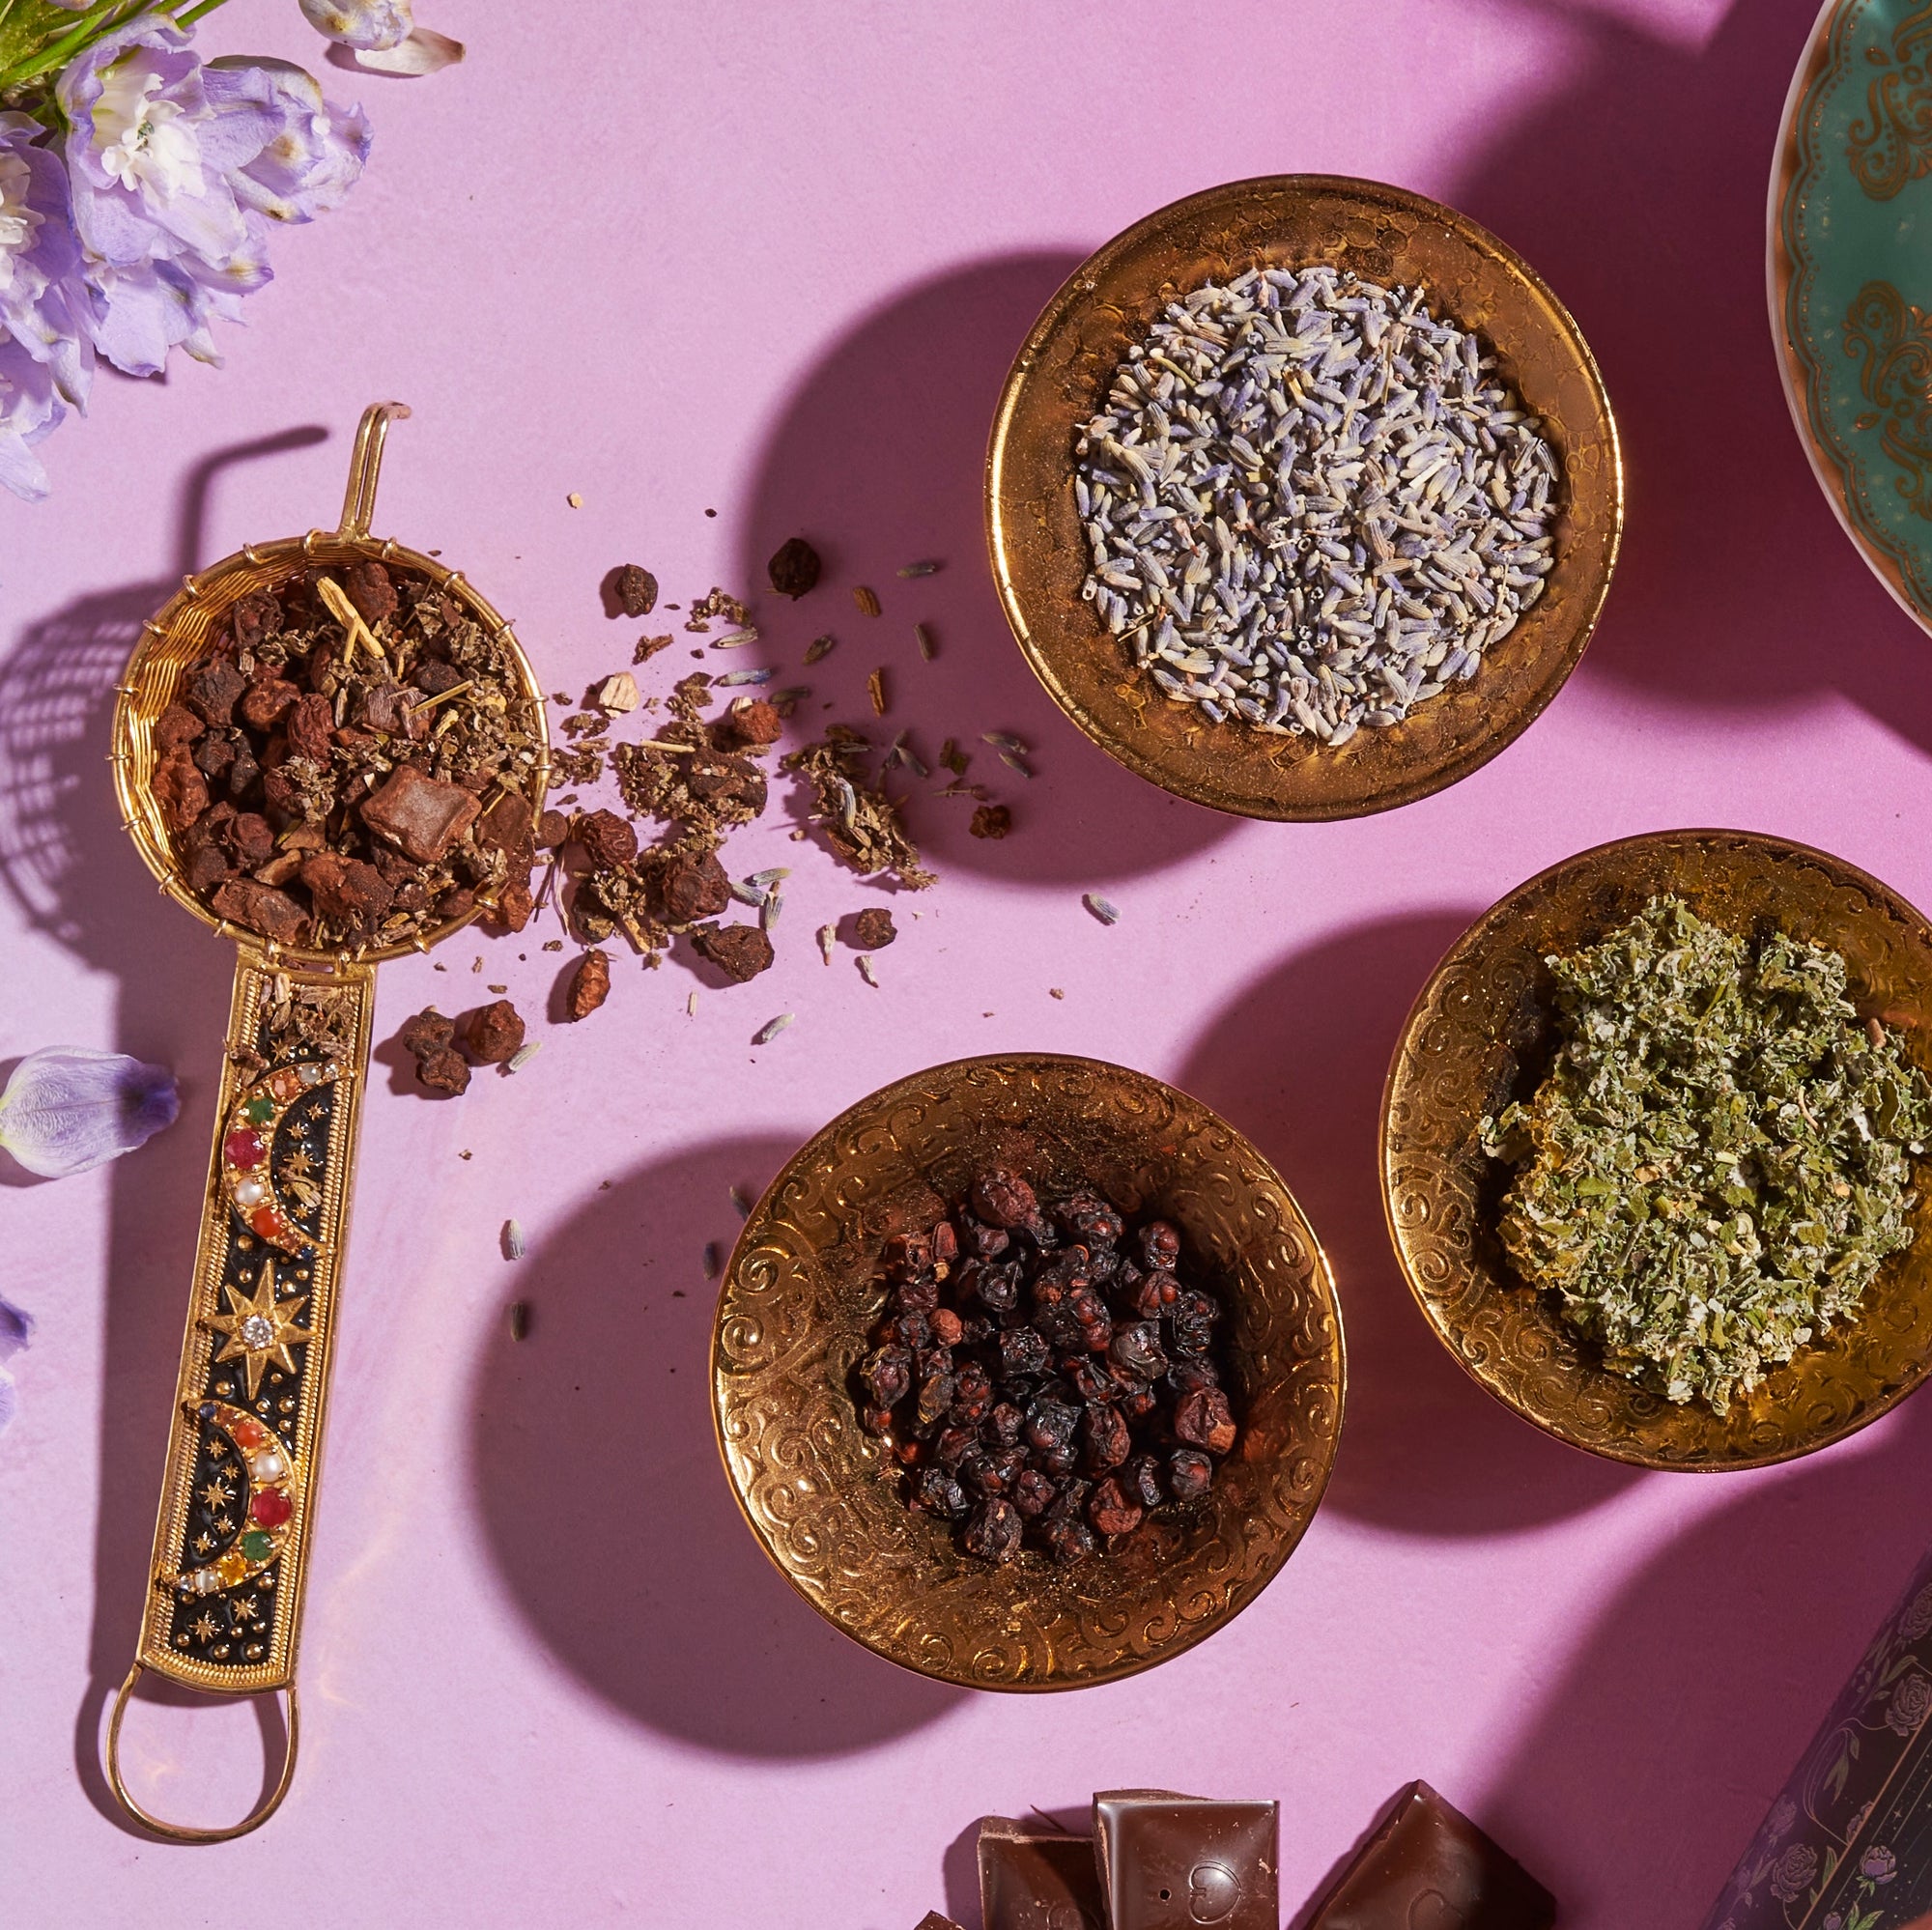 An overhead view of four ornate brass bowls on a pink surface. Each bowl contains different organic herbs and spices. The bowls are arranged neatly, casting shadows around them. Vibrant flowers and chocolate pieces surround the bowls, adding colorful touches reminiscent of a Magic Hour's The Empress: Lavender Currant Shatavari Cocoa Tea of Nurturing Creativity setup.